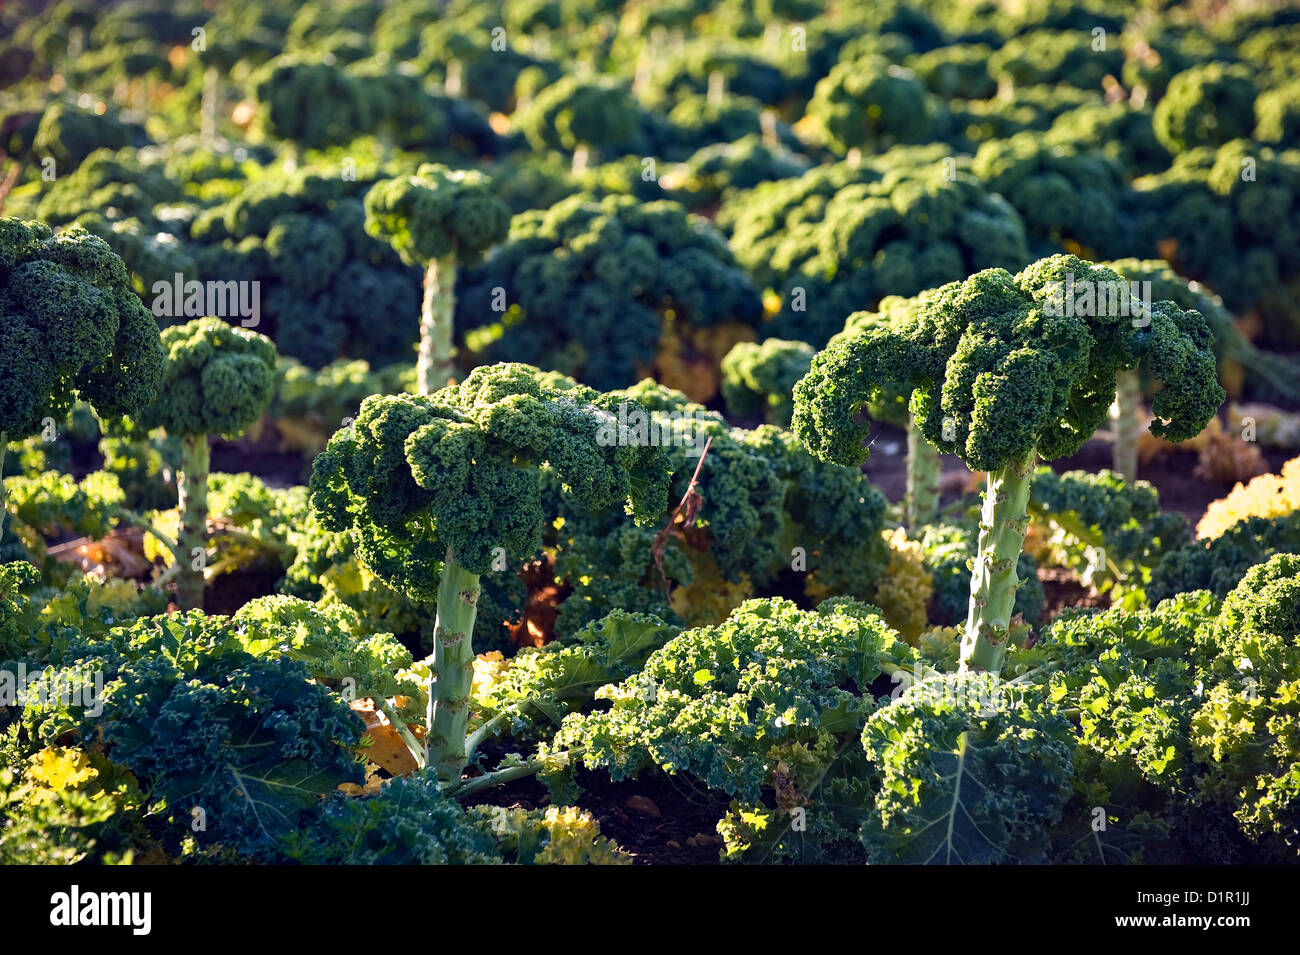 Brassica oleracea (Kale Kapitan) looking like an Amazonian rainforest viewed from the air. Stock Photo